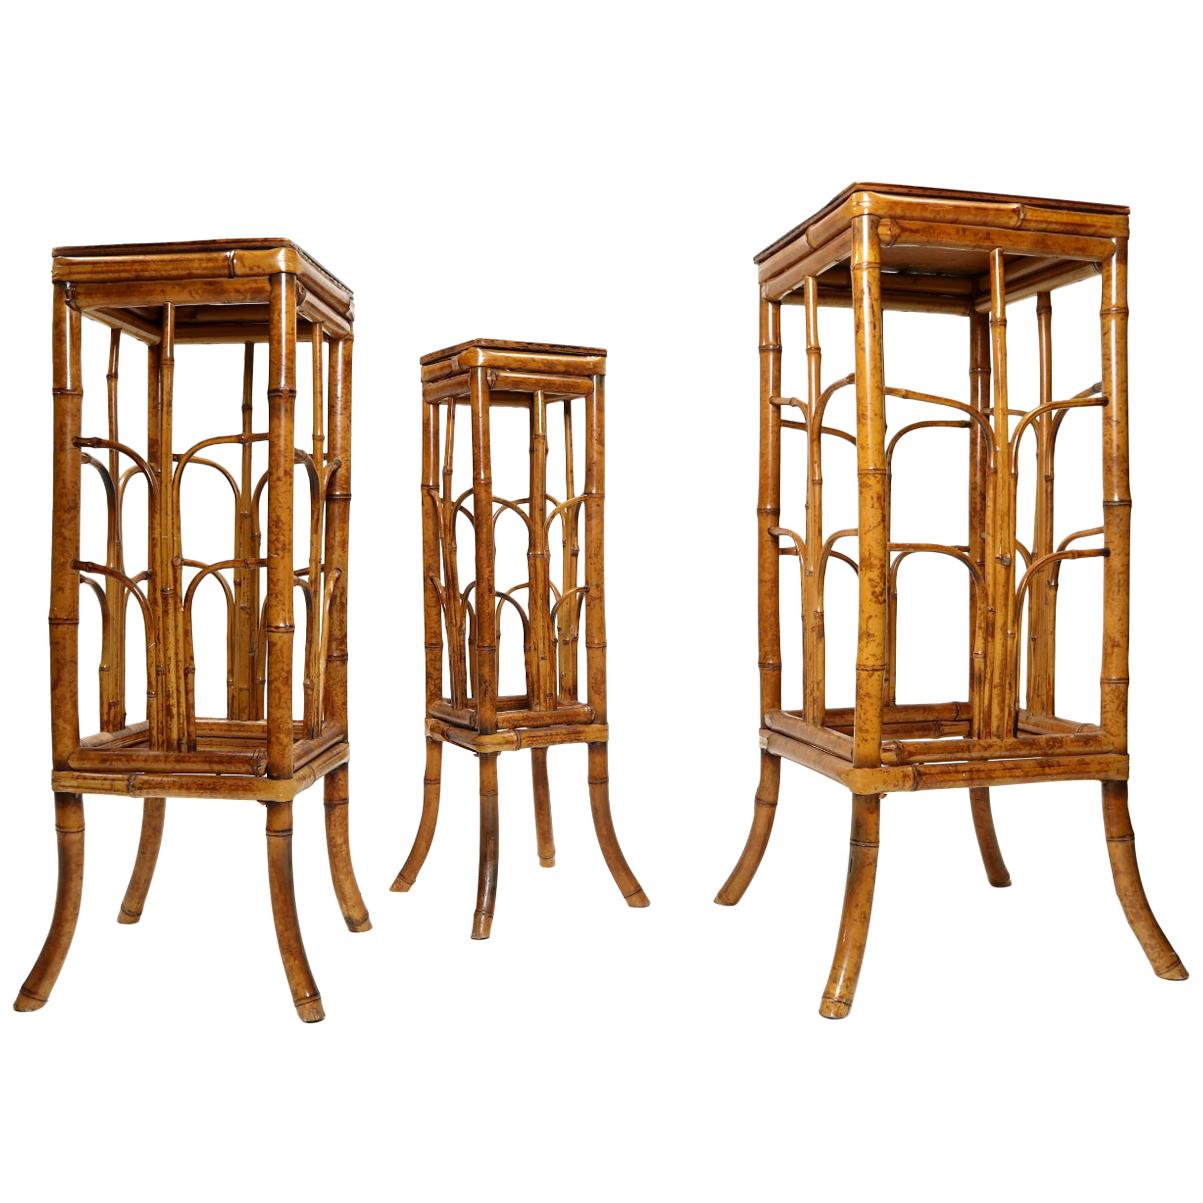 Set of Three Vintage Bohemian Tortoise Shell Bamboo Plant Stand Nesting Tables